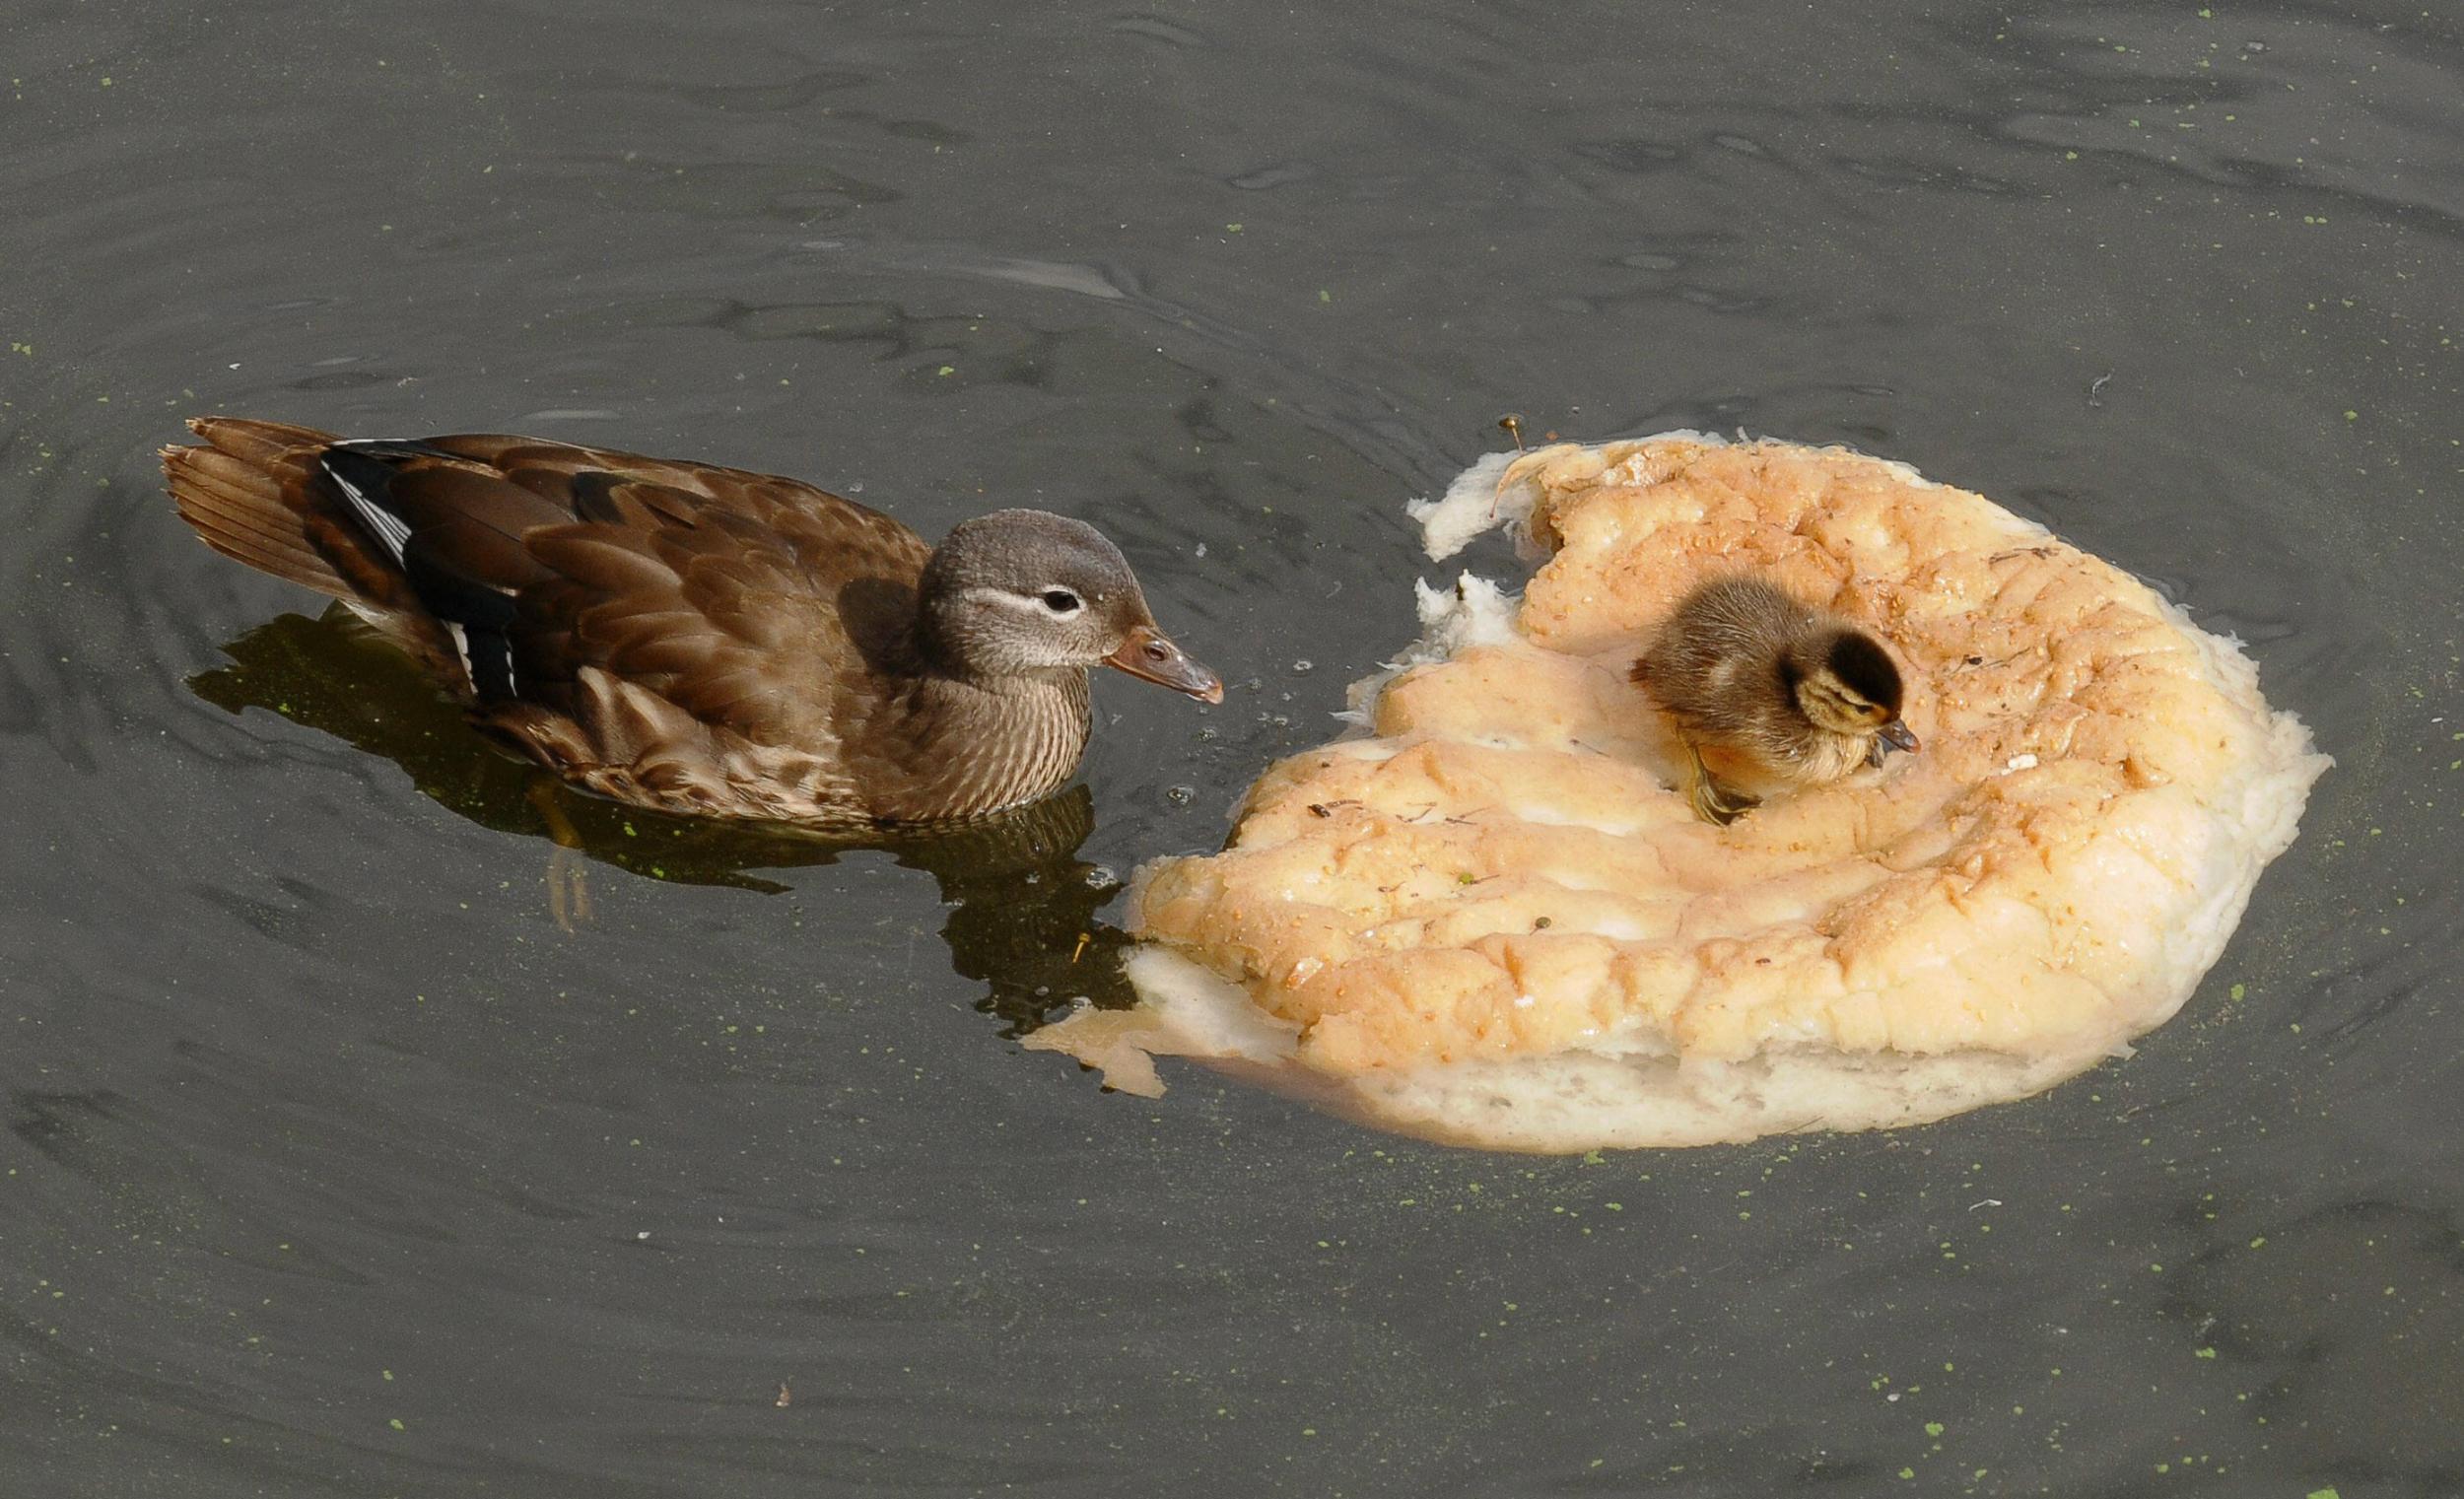 Ducks ditching bread for healthier diet after public handed loaf ...